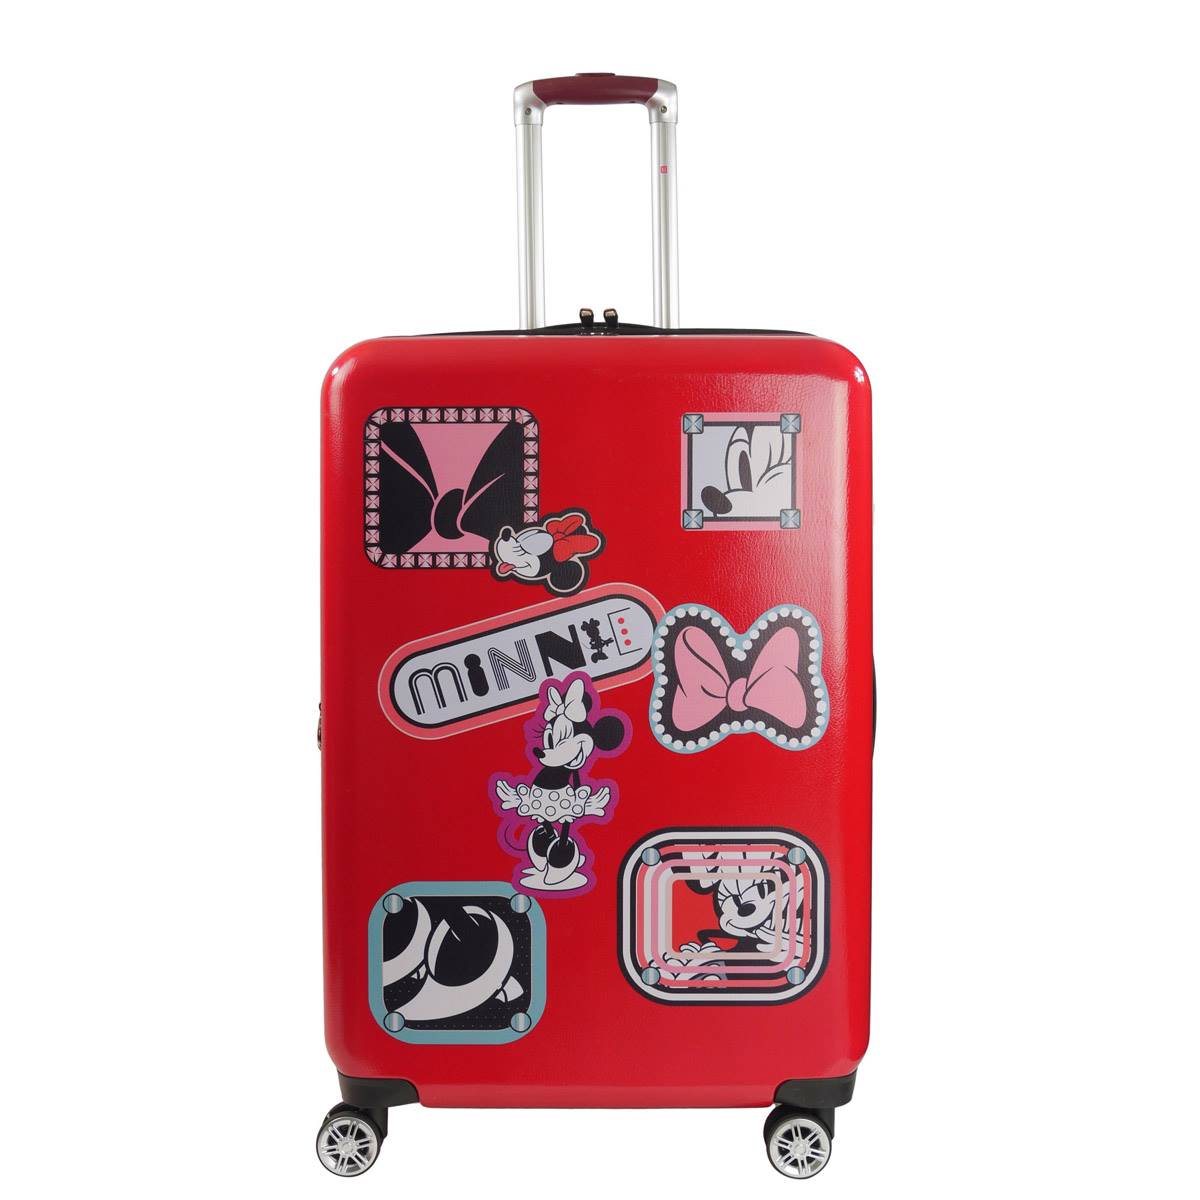 FUL Minnie Mouse 29in. Patch Design Hardside Luggage